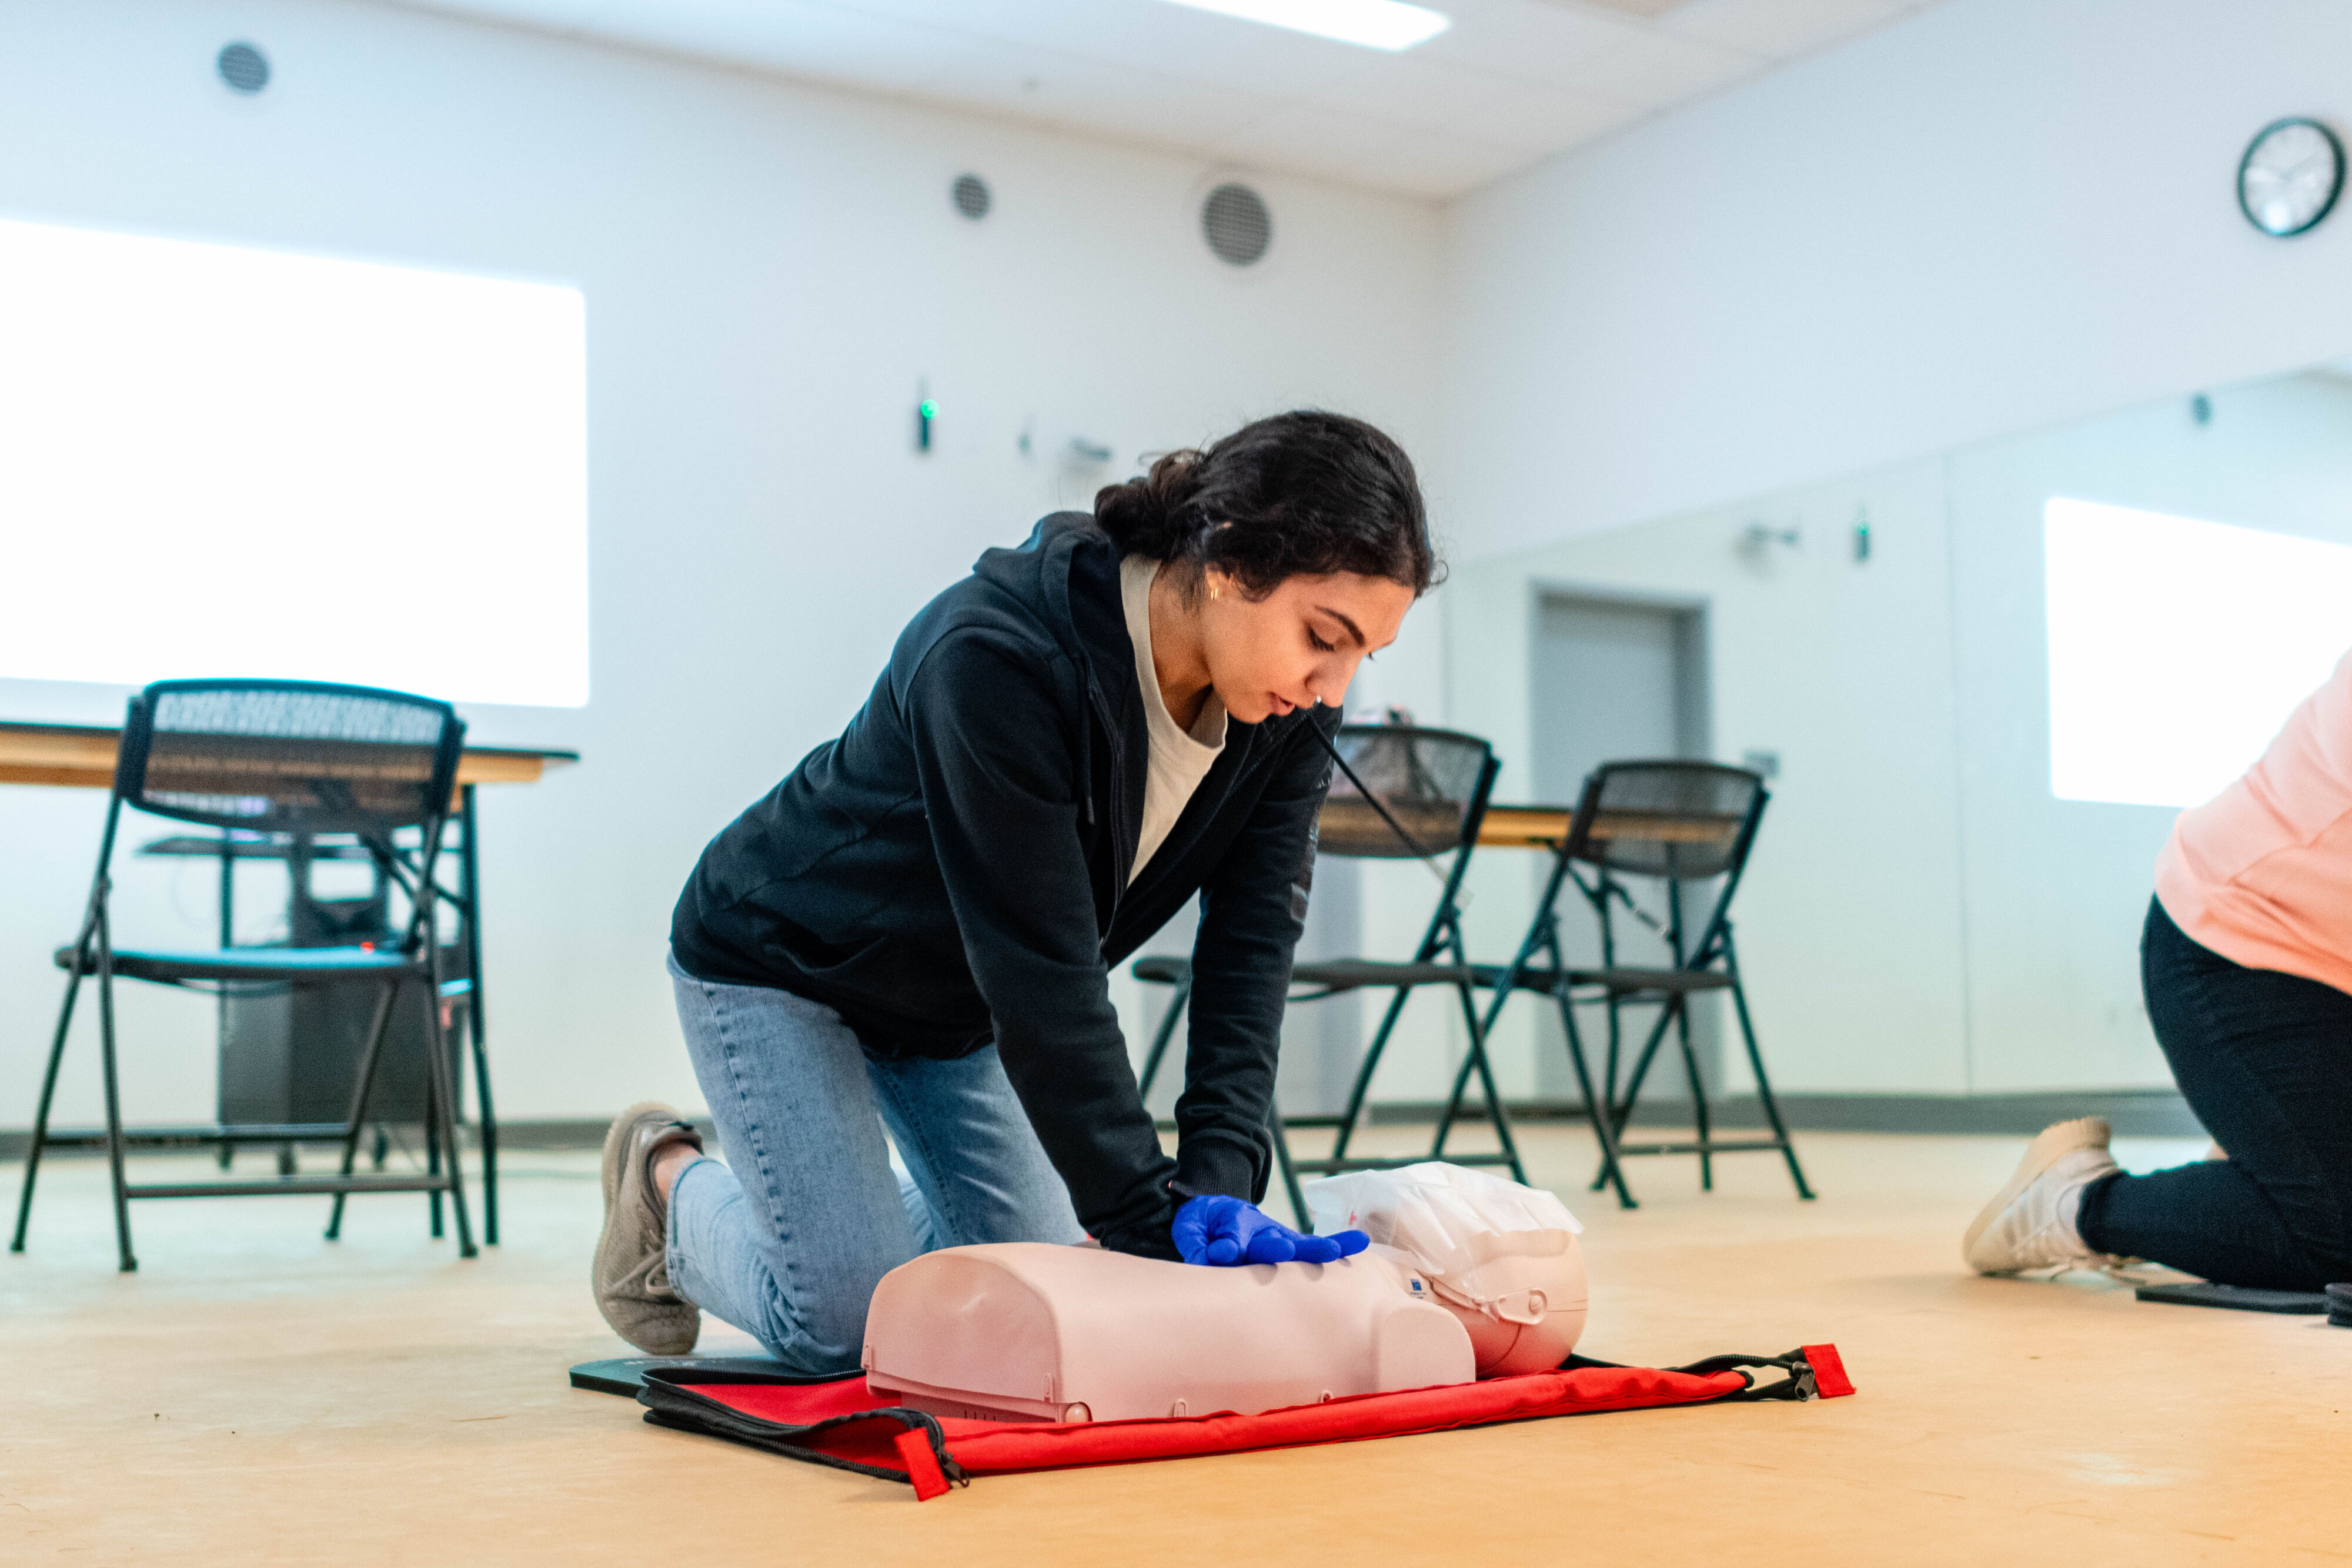 A person is practicing CPR on a mannequin in a training room